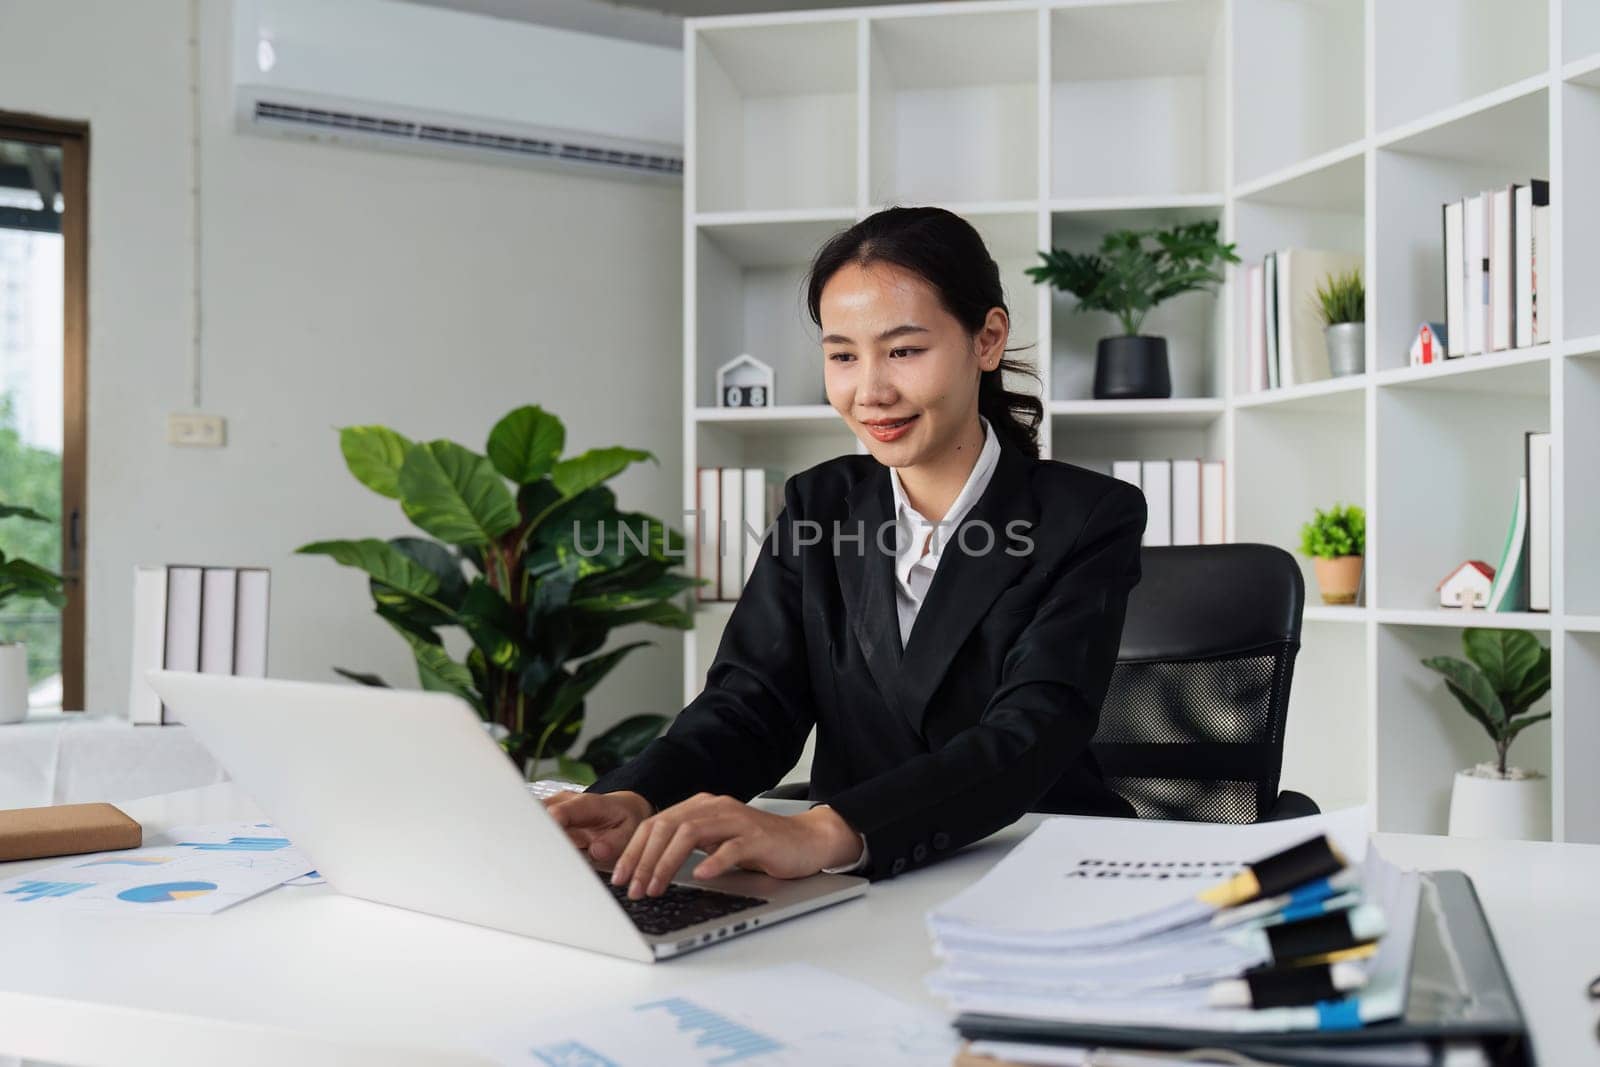 Businesswoman analyzing marketing strategy on laptop, typing work on laptop by itchaznong